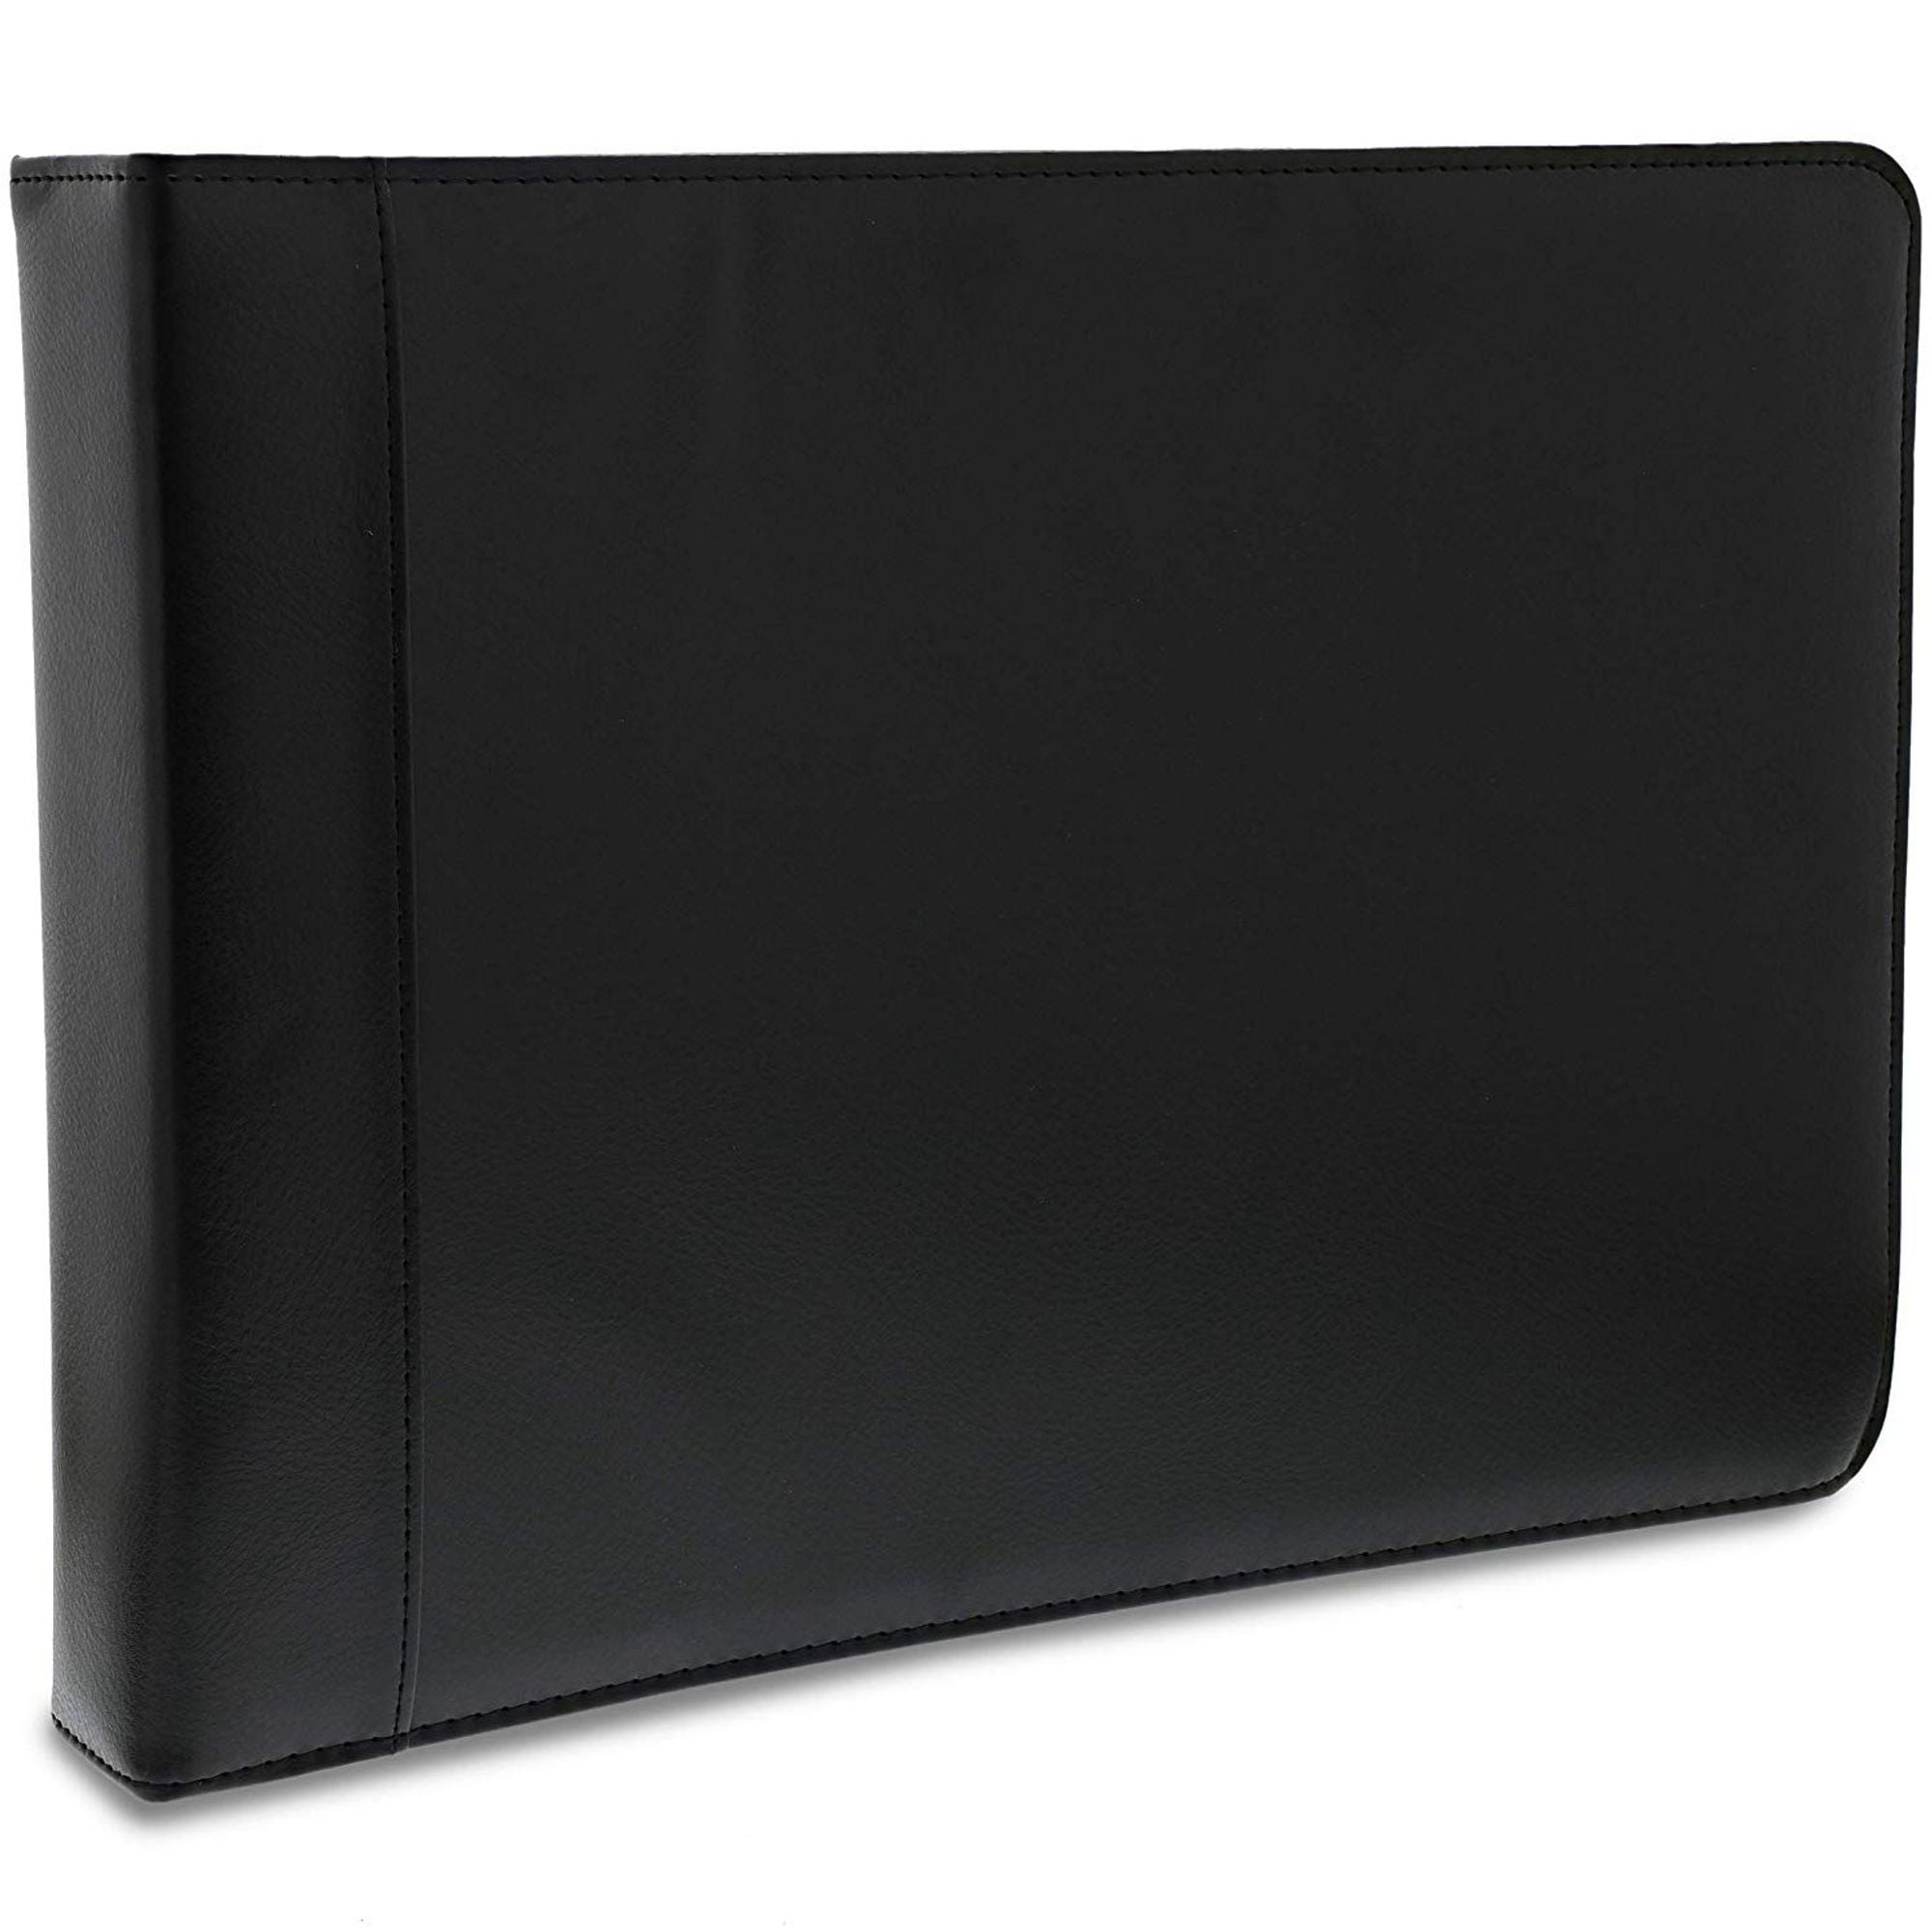 PU Leather Portfolio Details about   Business Check 7 Ring Checkbook Binder Built in Storage O